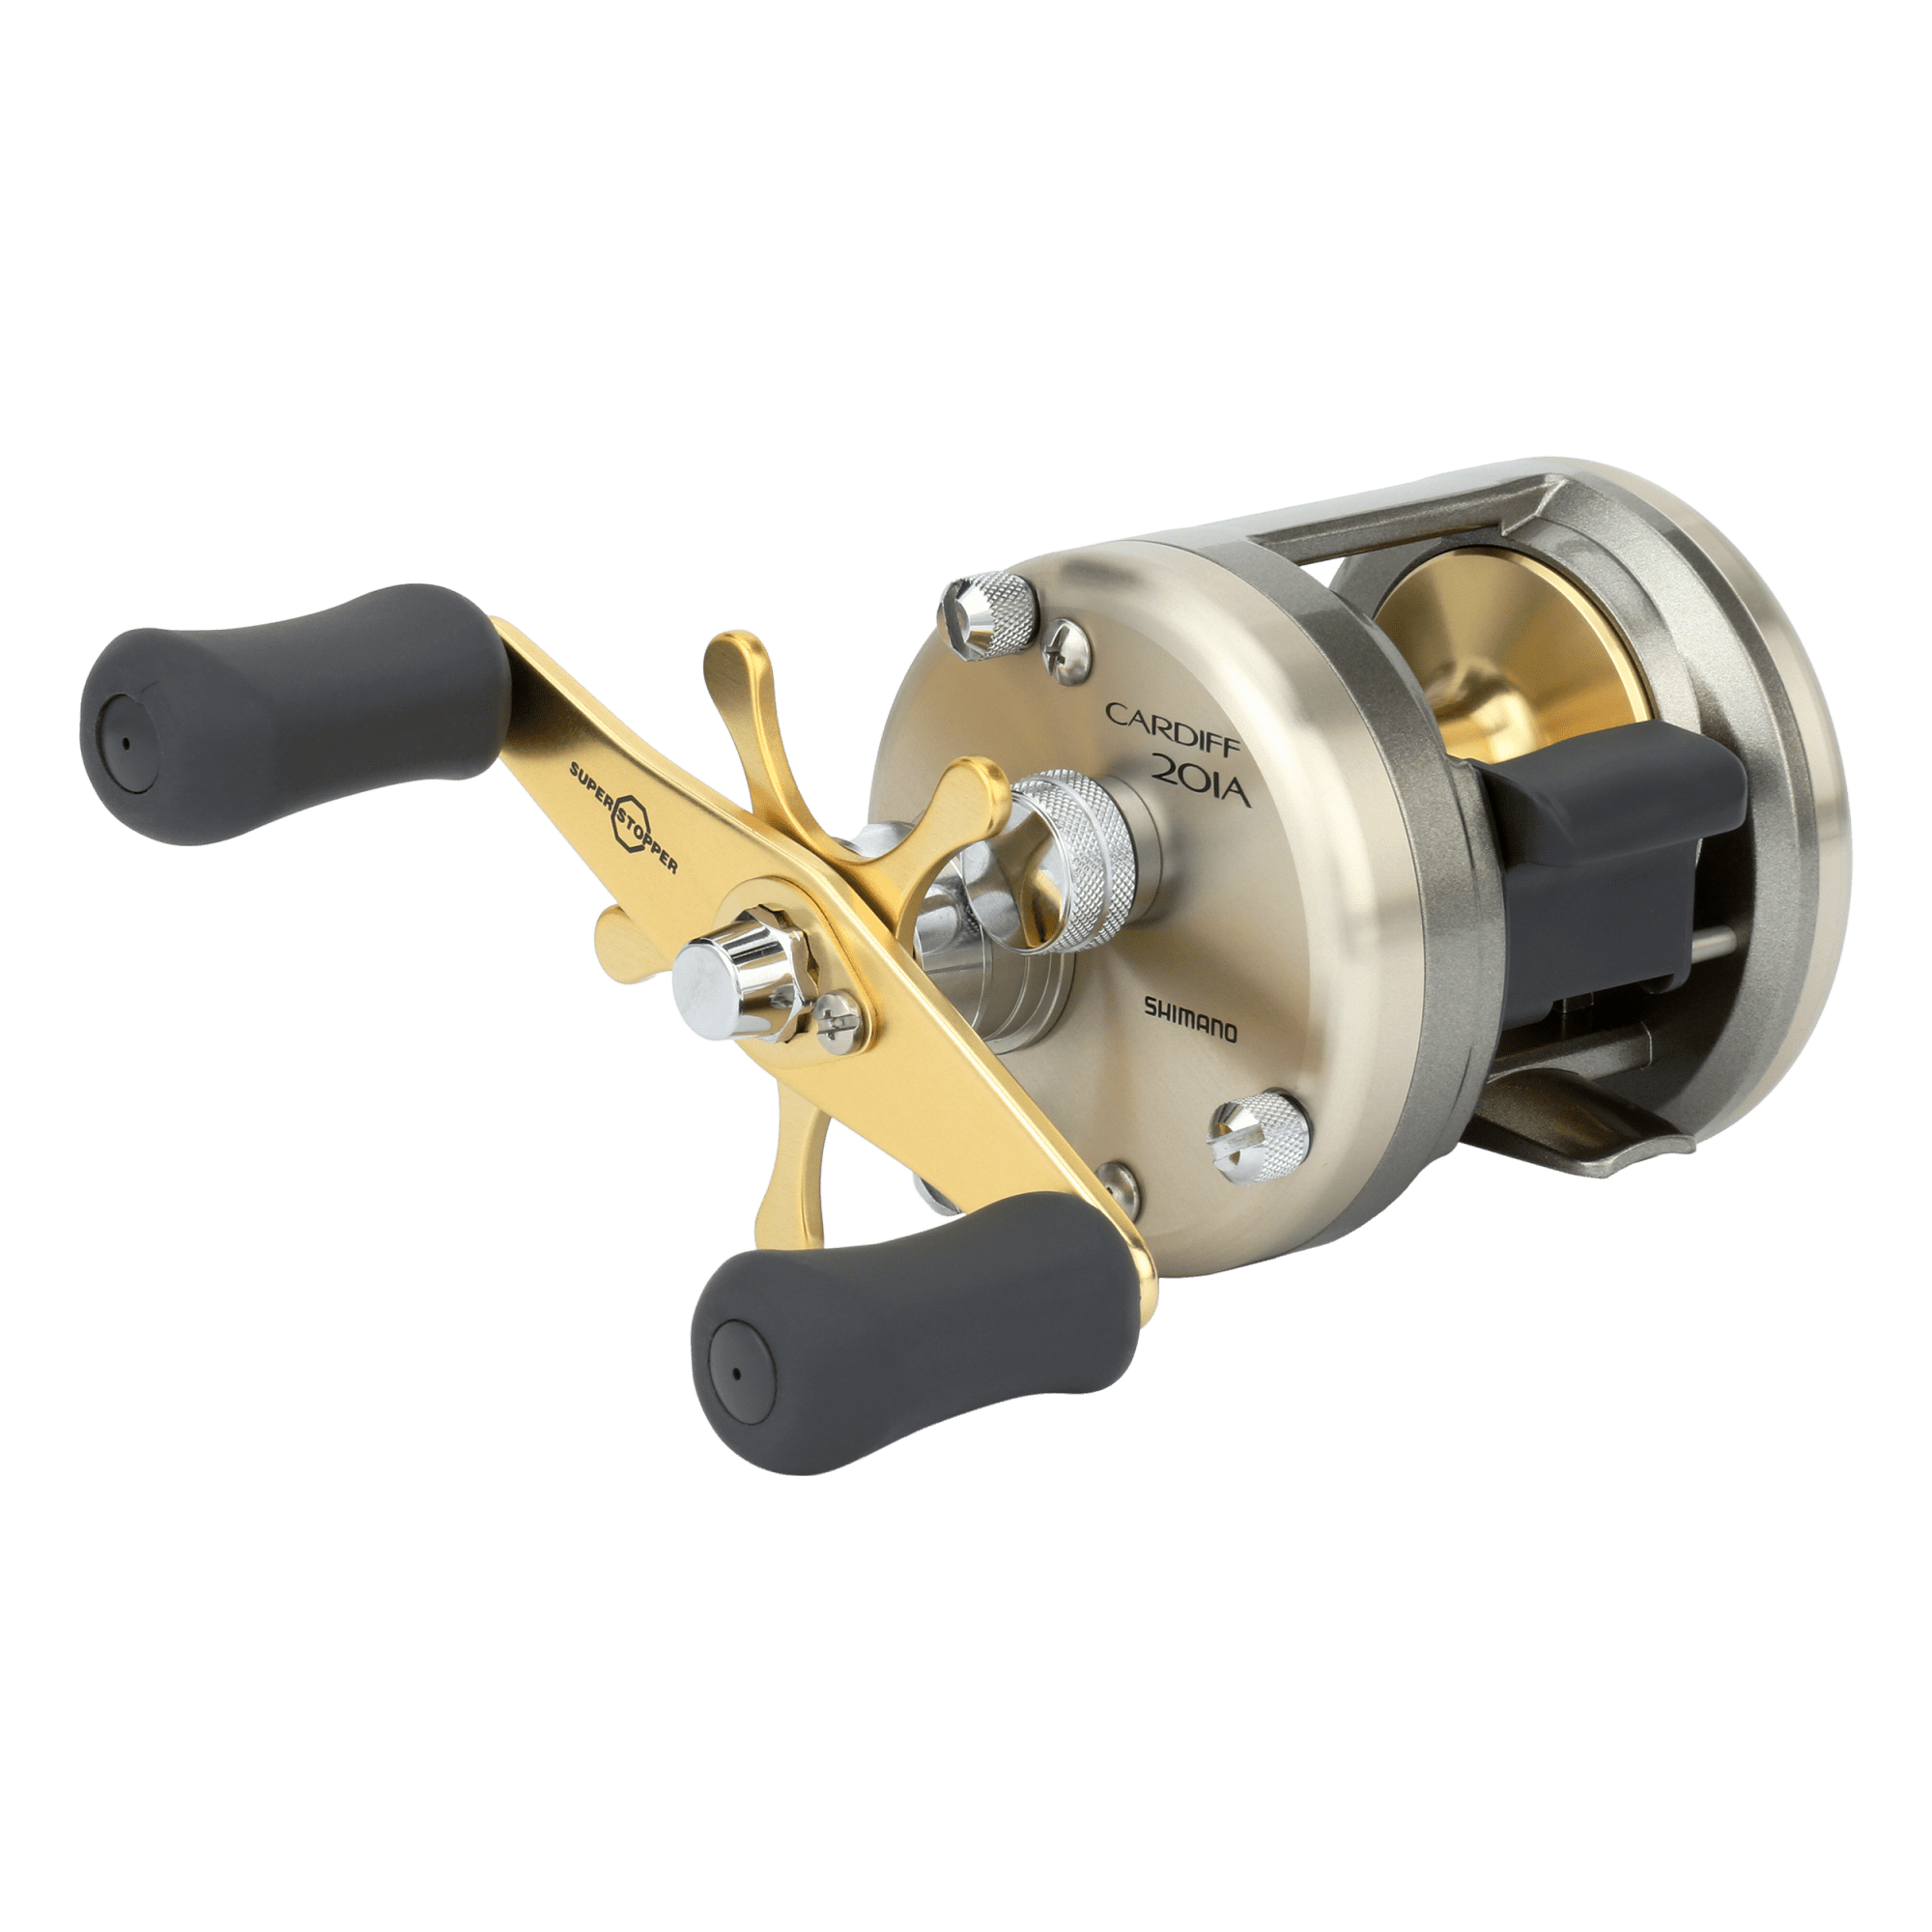 Shimano Fishing CARDIFF 401A (L) Round Reels [CDF401A]